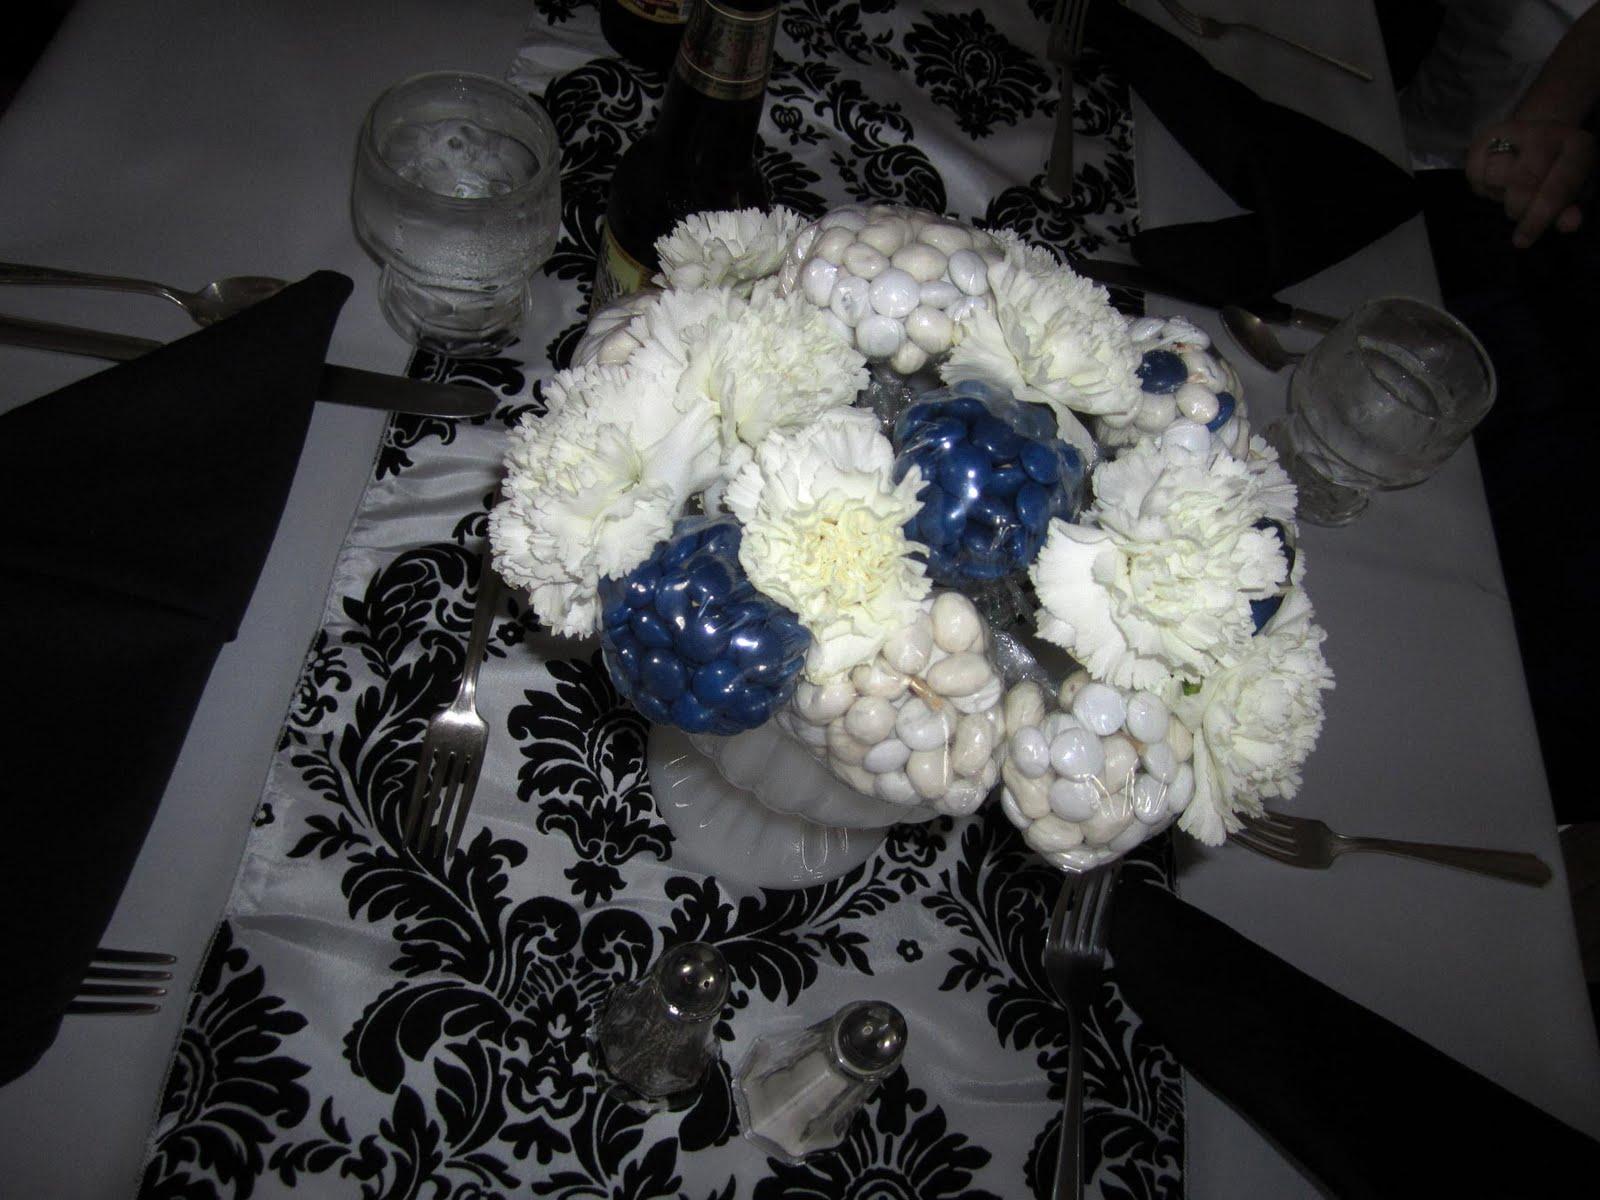 the finished centerpiece